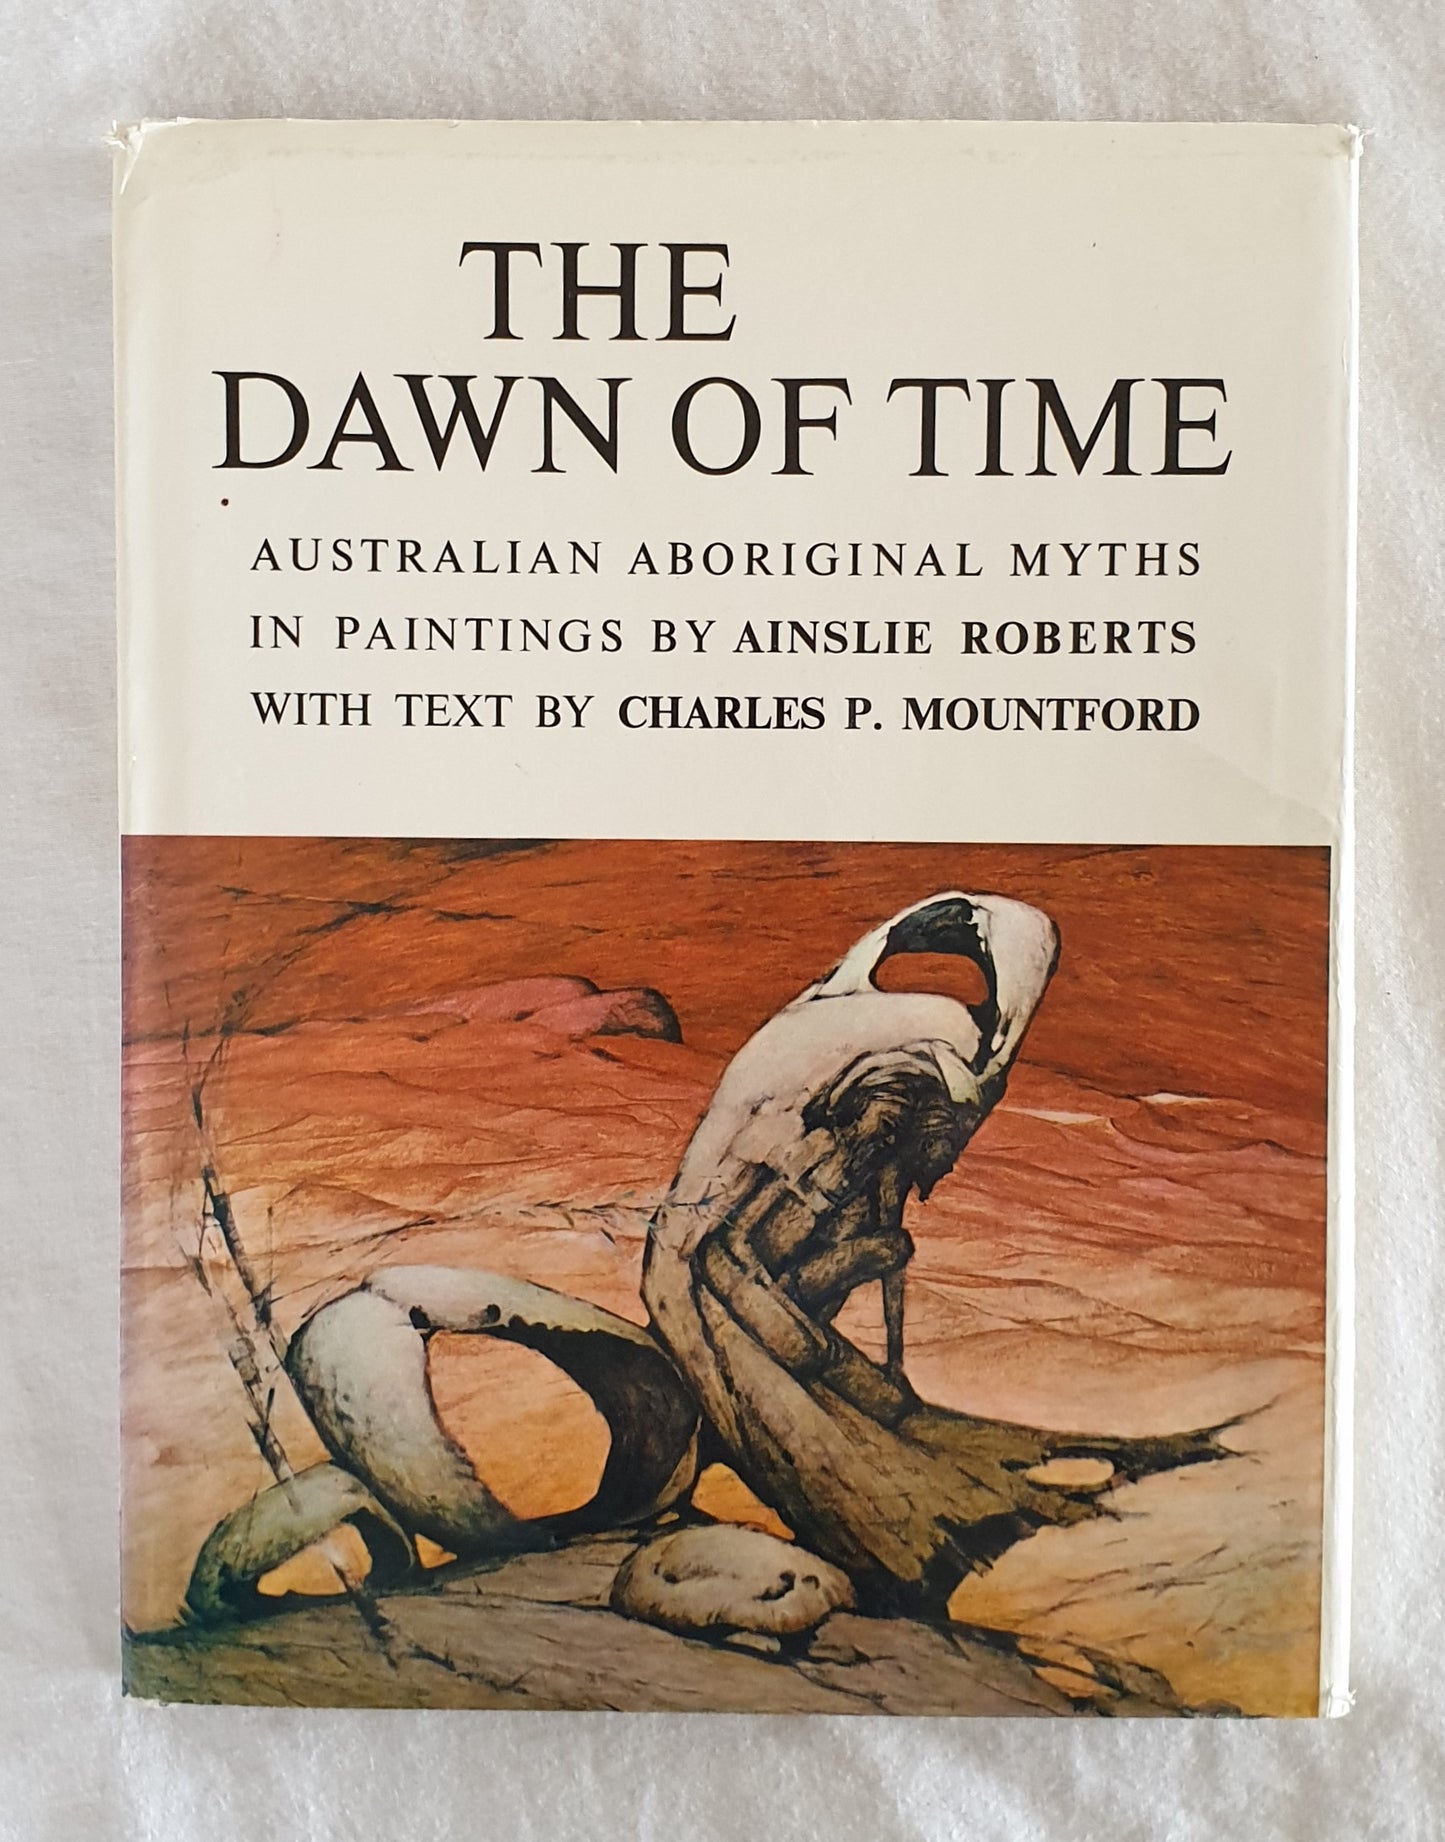 The Dawn of Time  Australian Aboriginal Myths in Paintings by Ainslie Roberts  Text by Charles P. Mountford